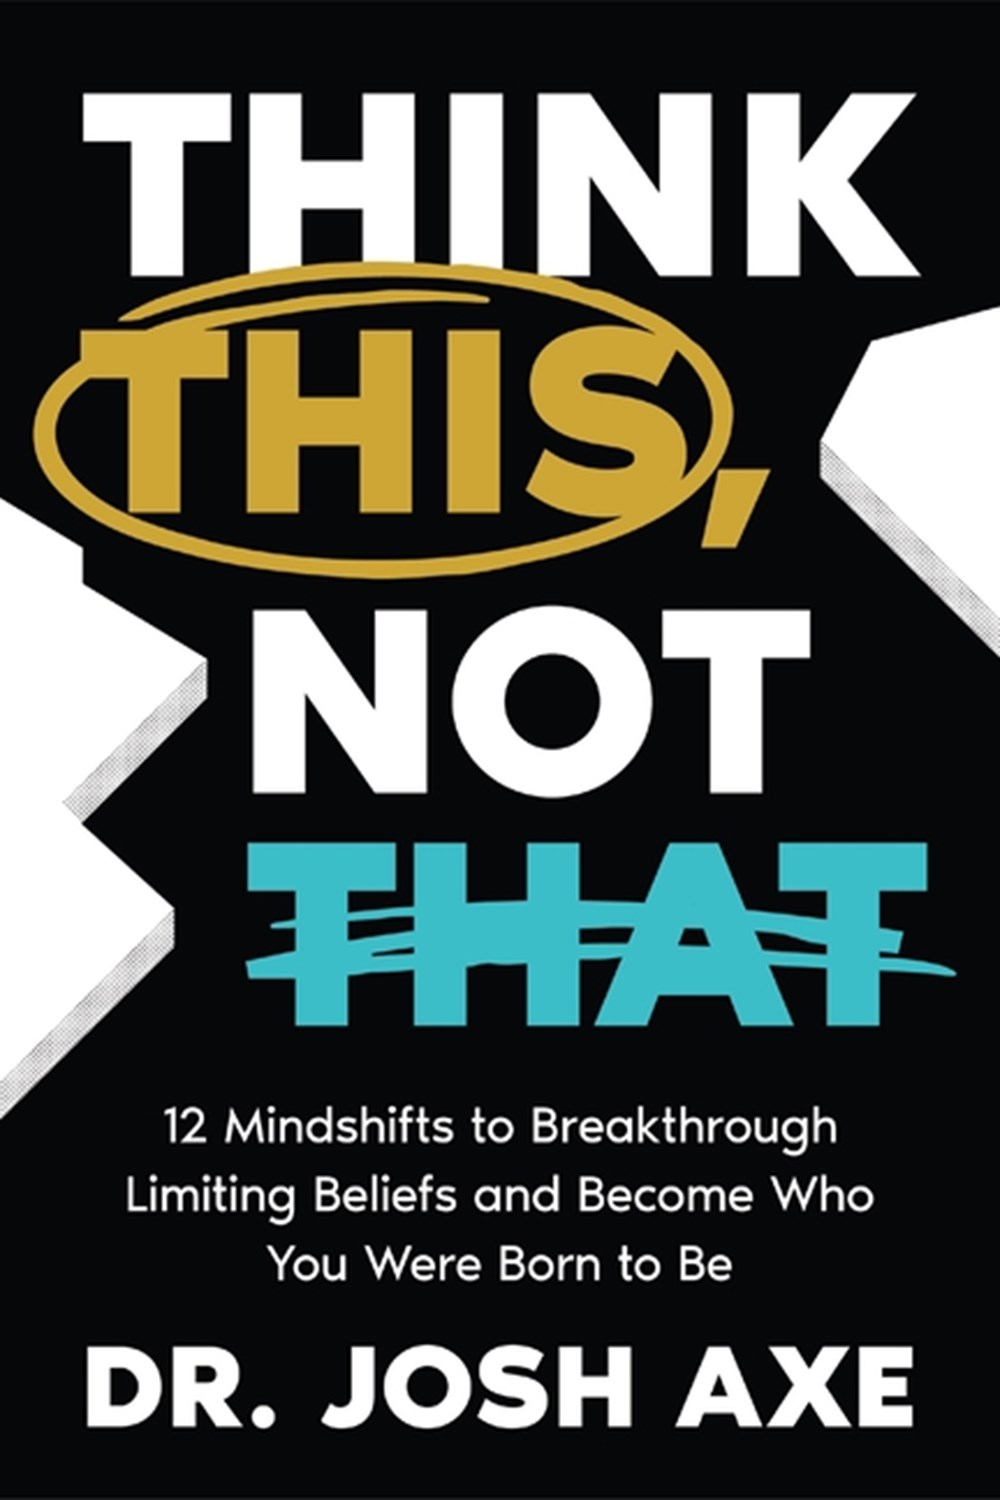 Think This, Not That: 12 Mindshifts to Breakthrough Limiting Beliefs and Become Who You Were Born to